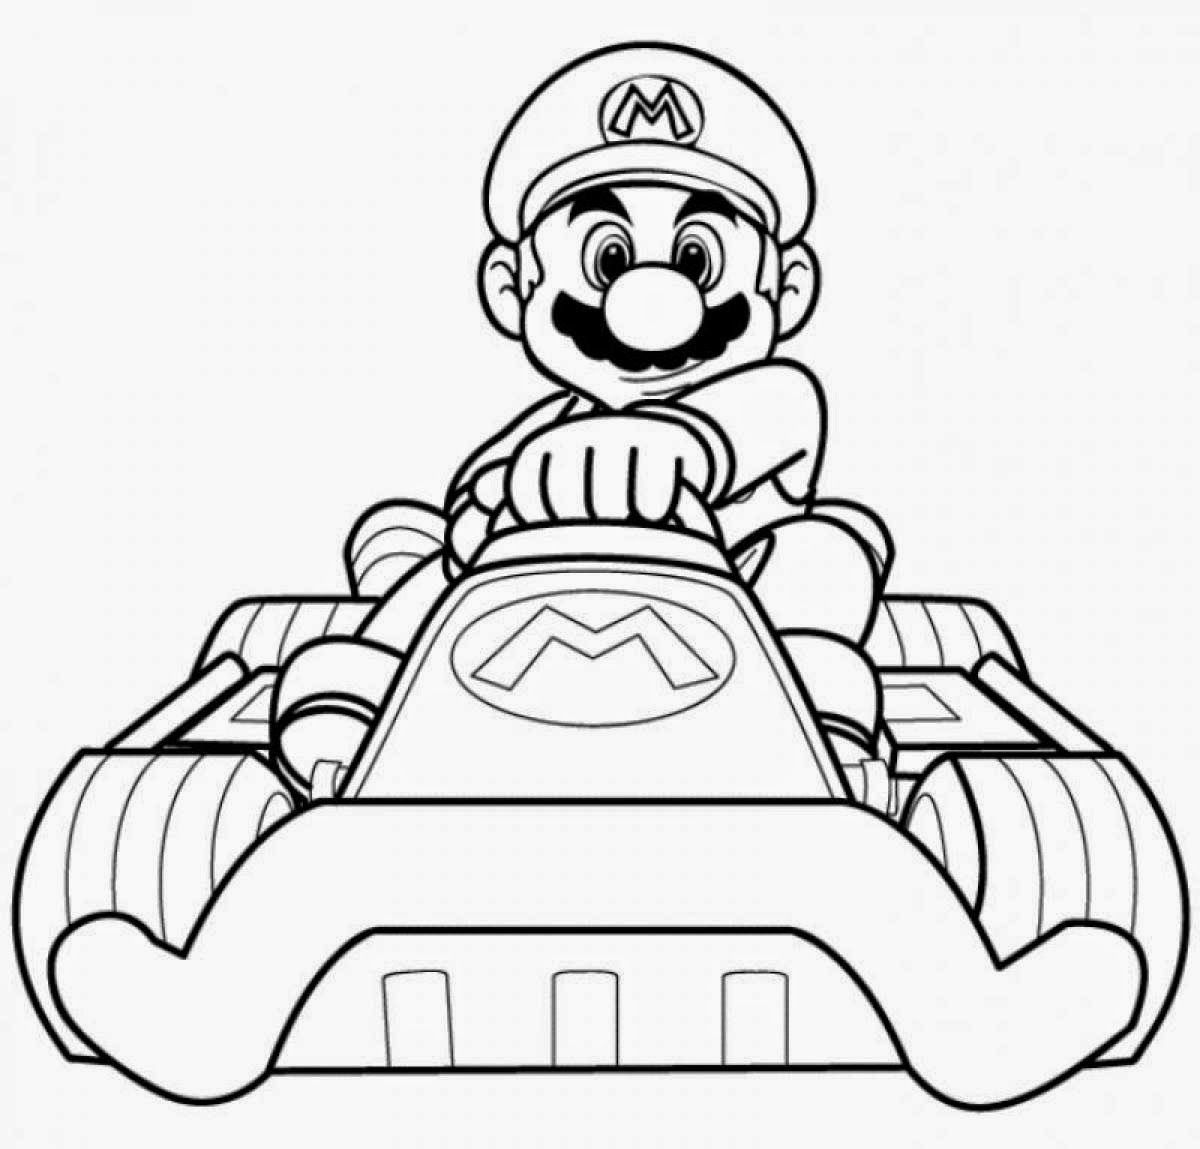 Free Printable mario kart coloring pages for